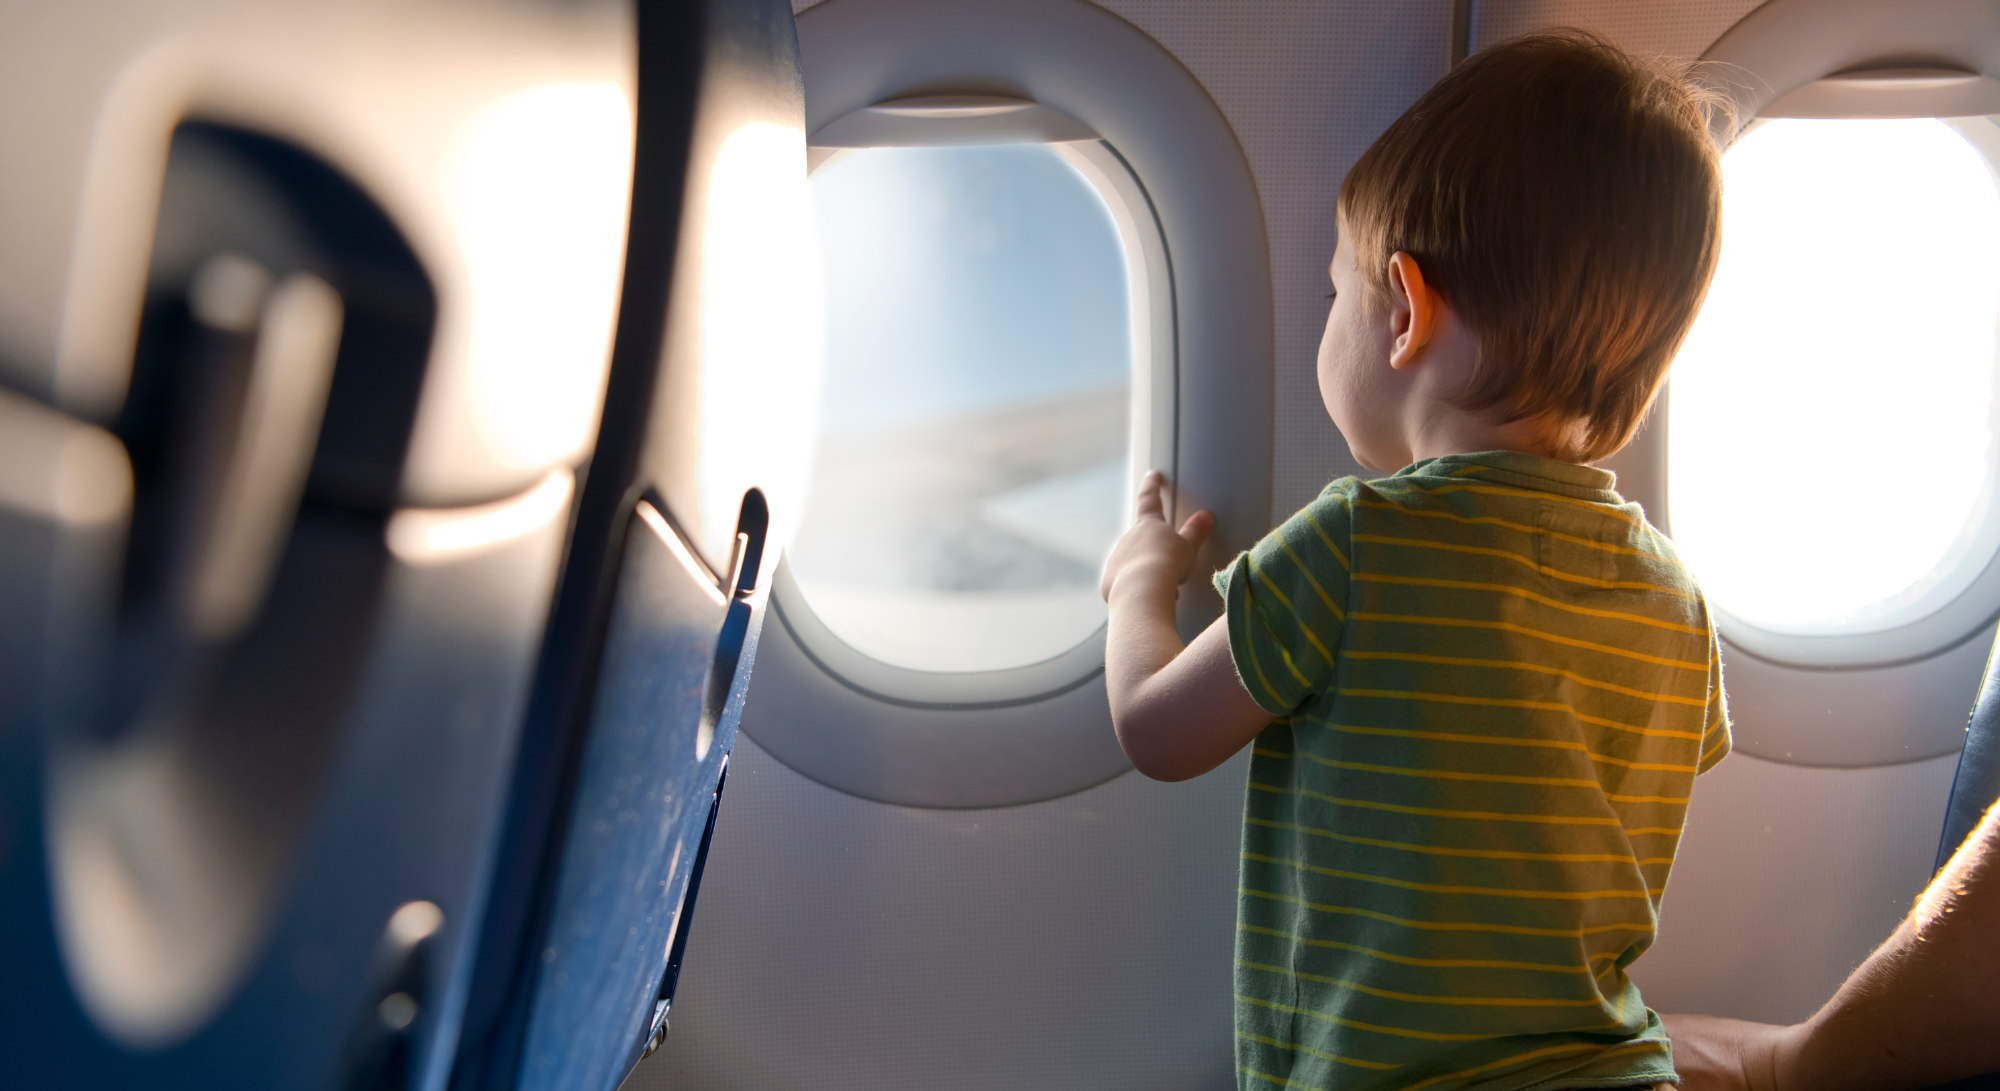 A Paediatrician’s Guide on Beating Jet Lag in Kids